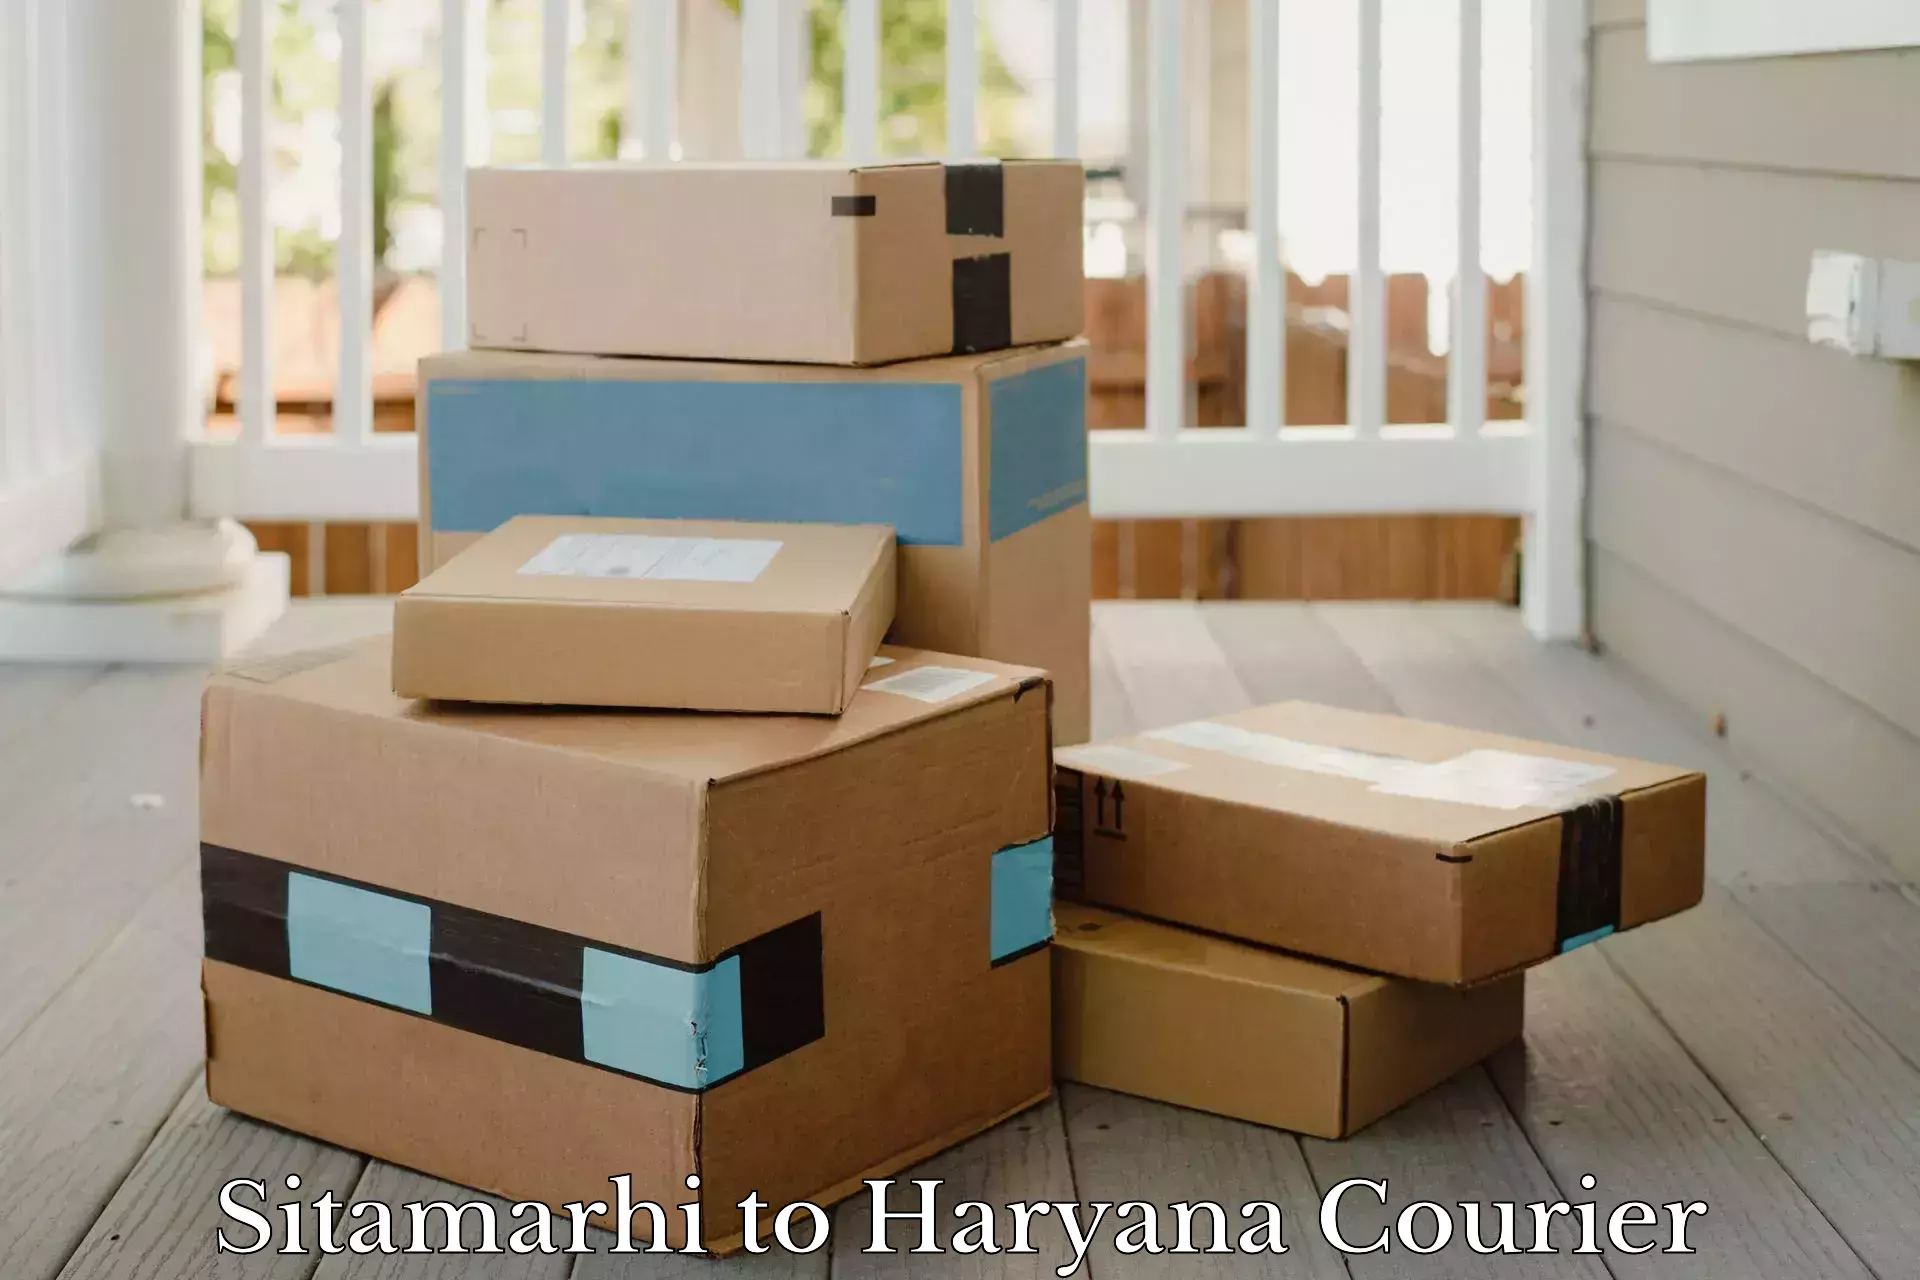 Efficient package consolidation Sitamarhi to Gurgaon